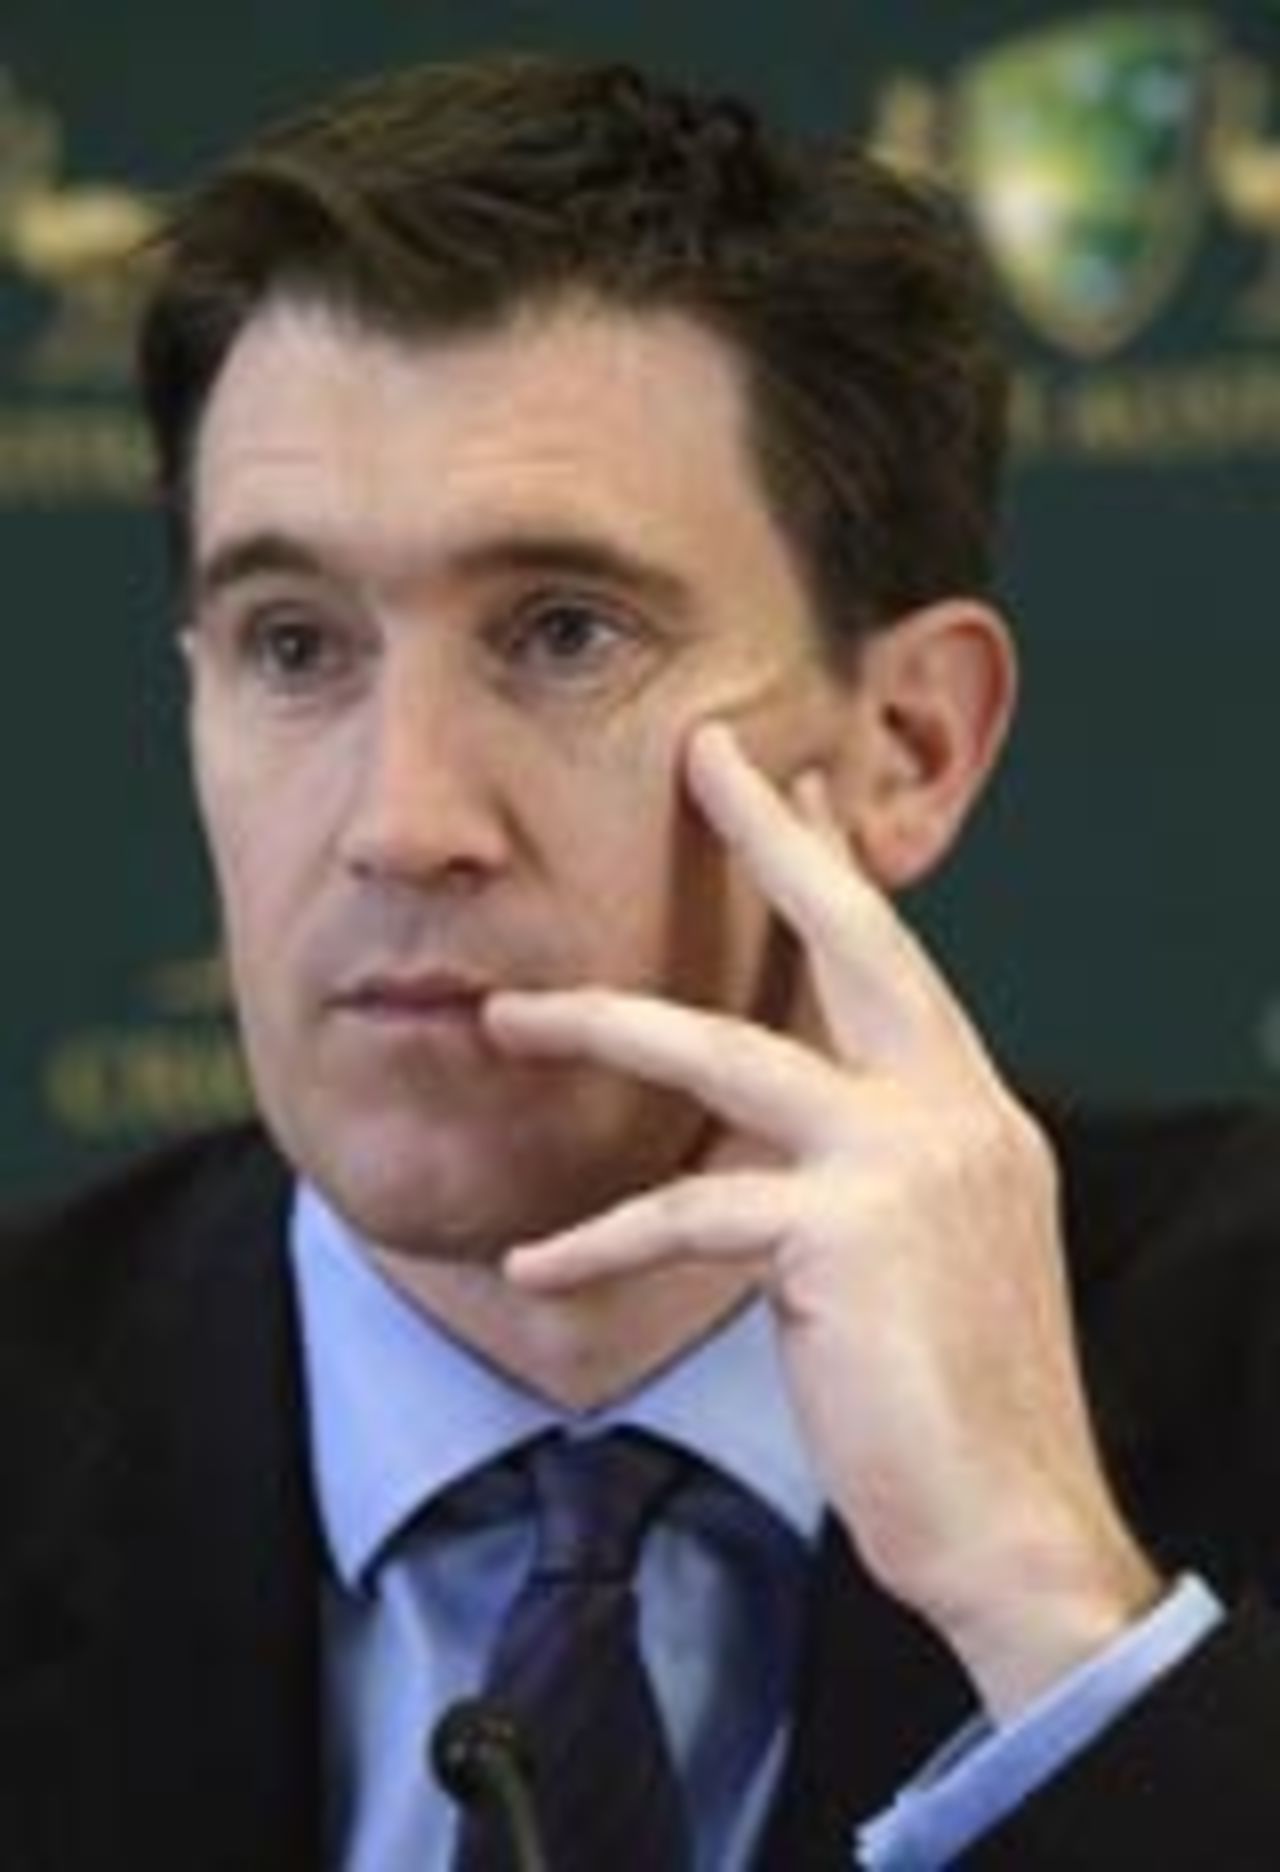 James Sutherland addressing the media in Melbourne, May 19, 2004